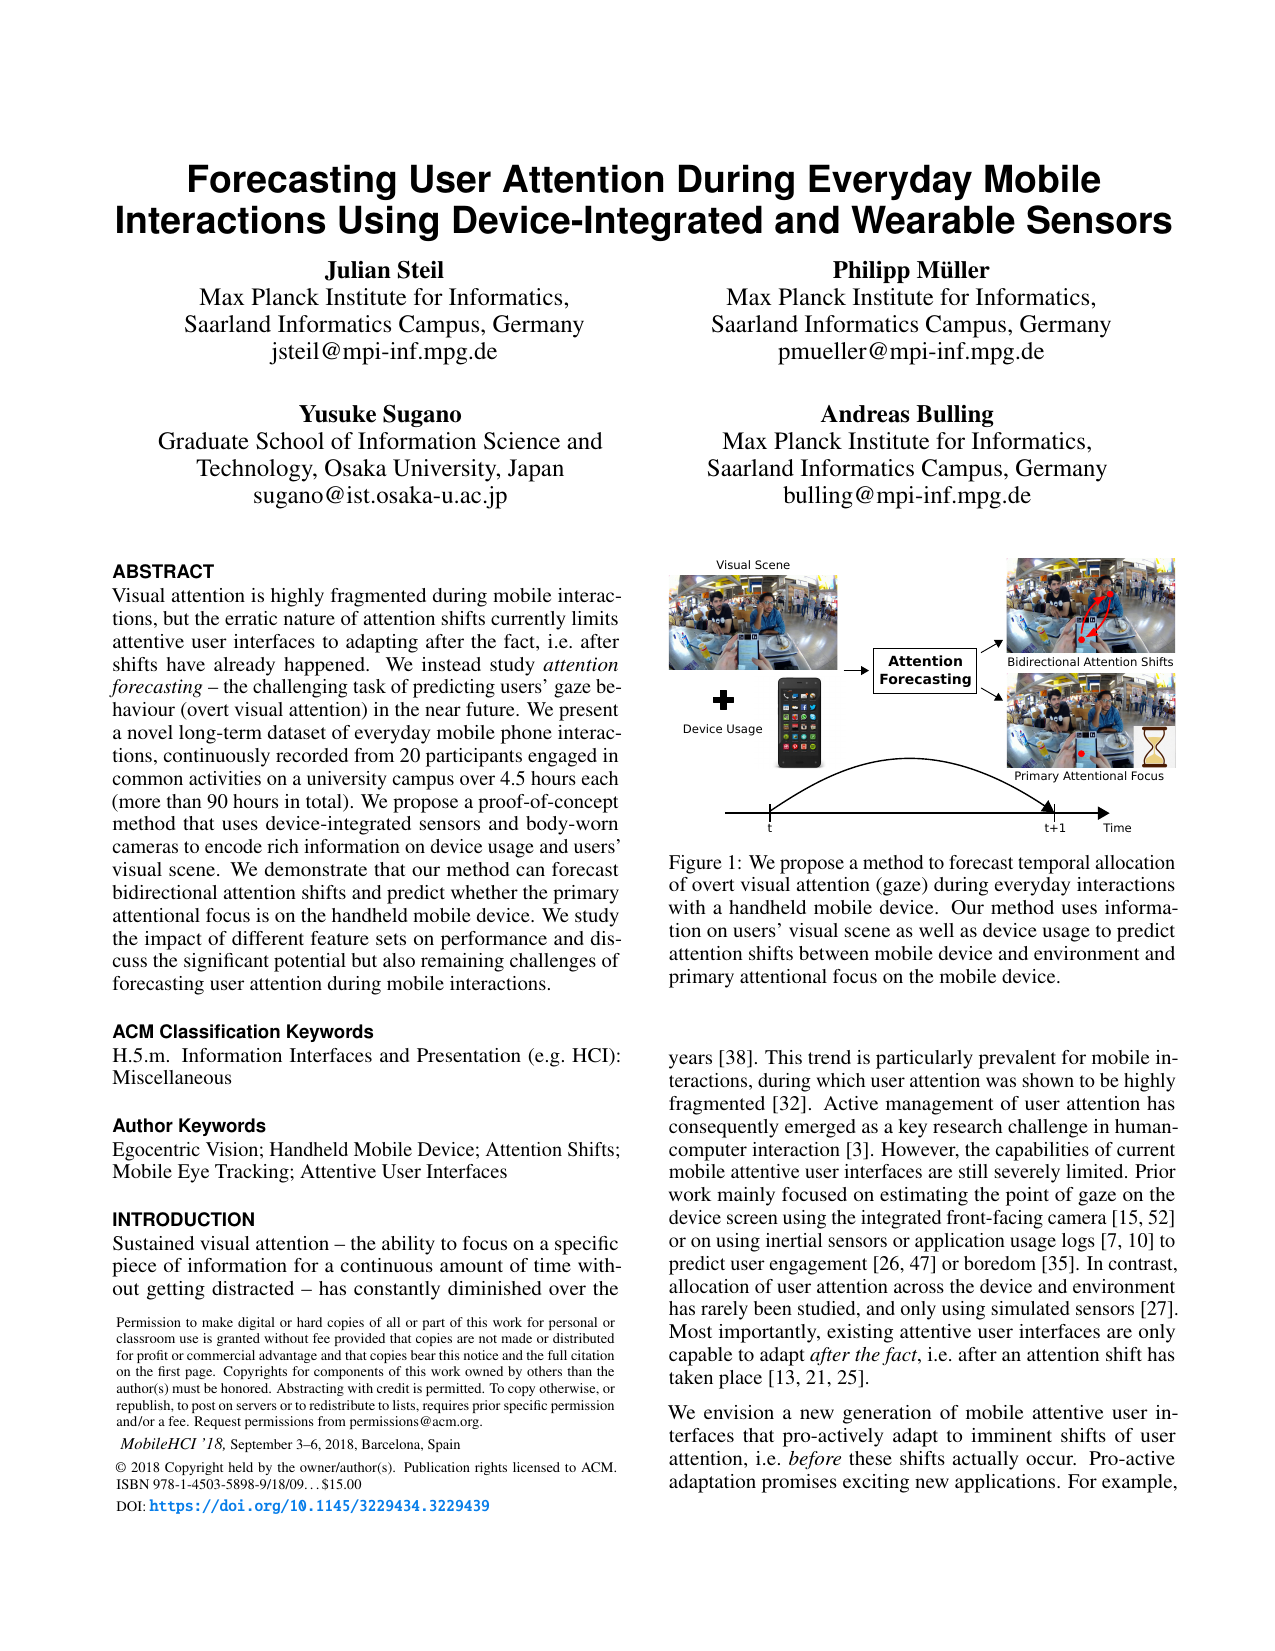 Forecasting User Attention During Everyday Mobile Interactions Using Device-Integrated and Wearable Sensors